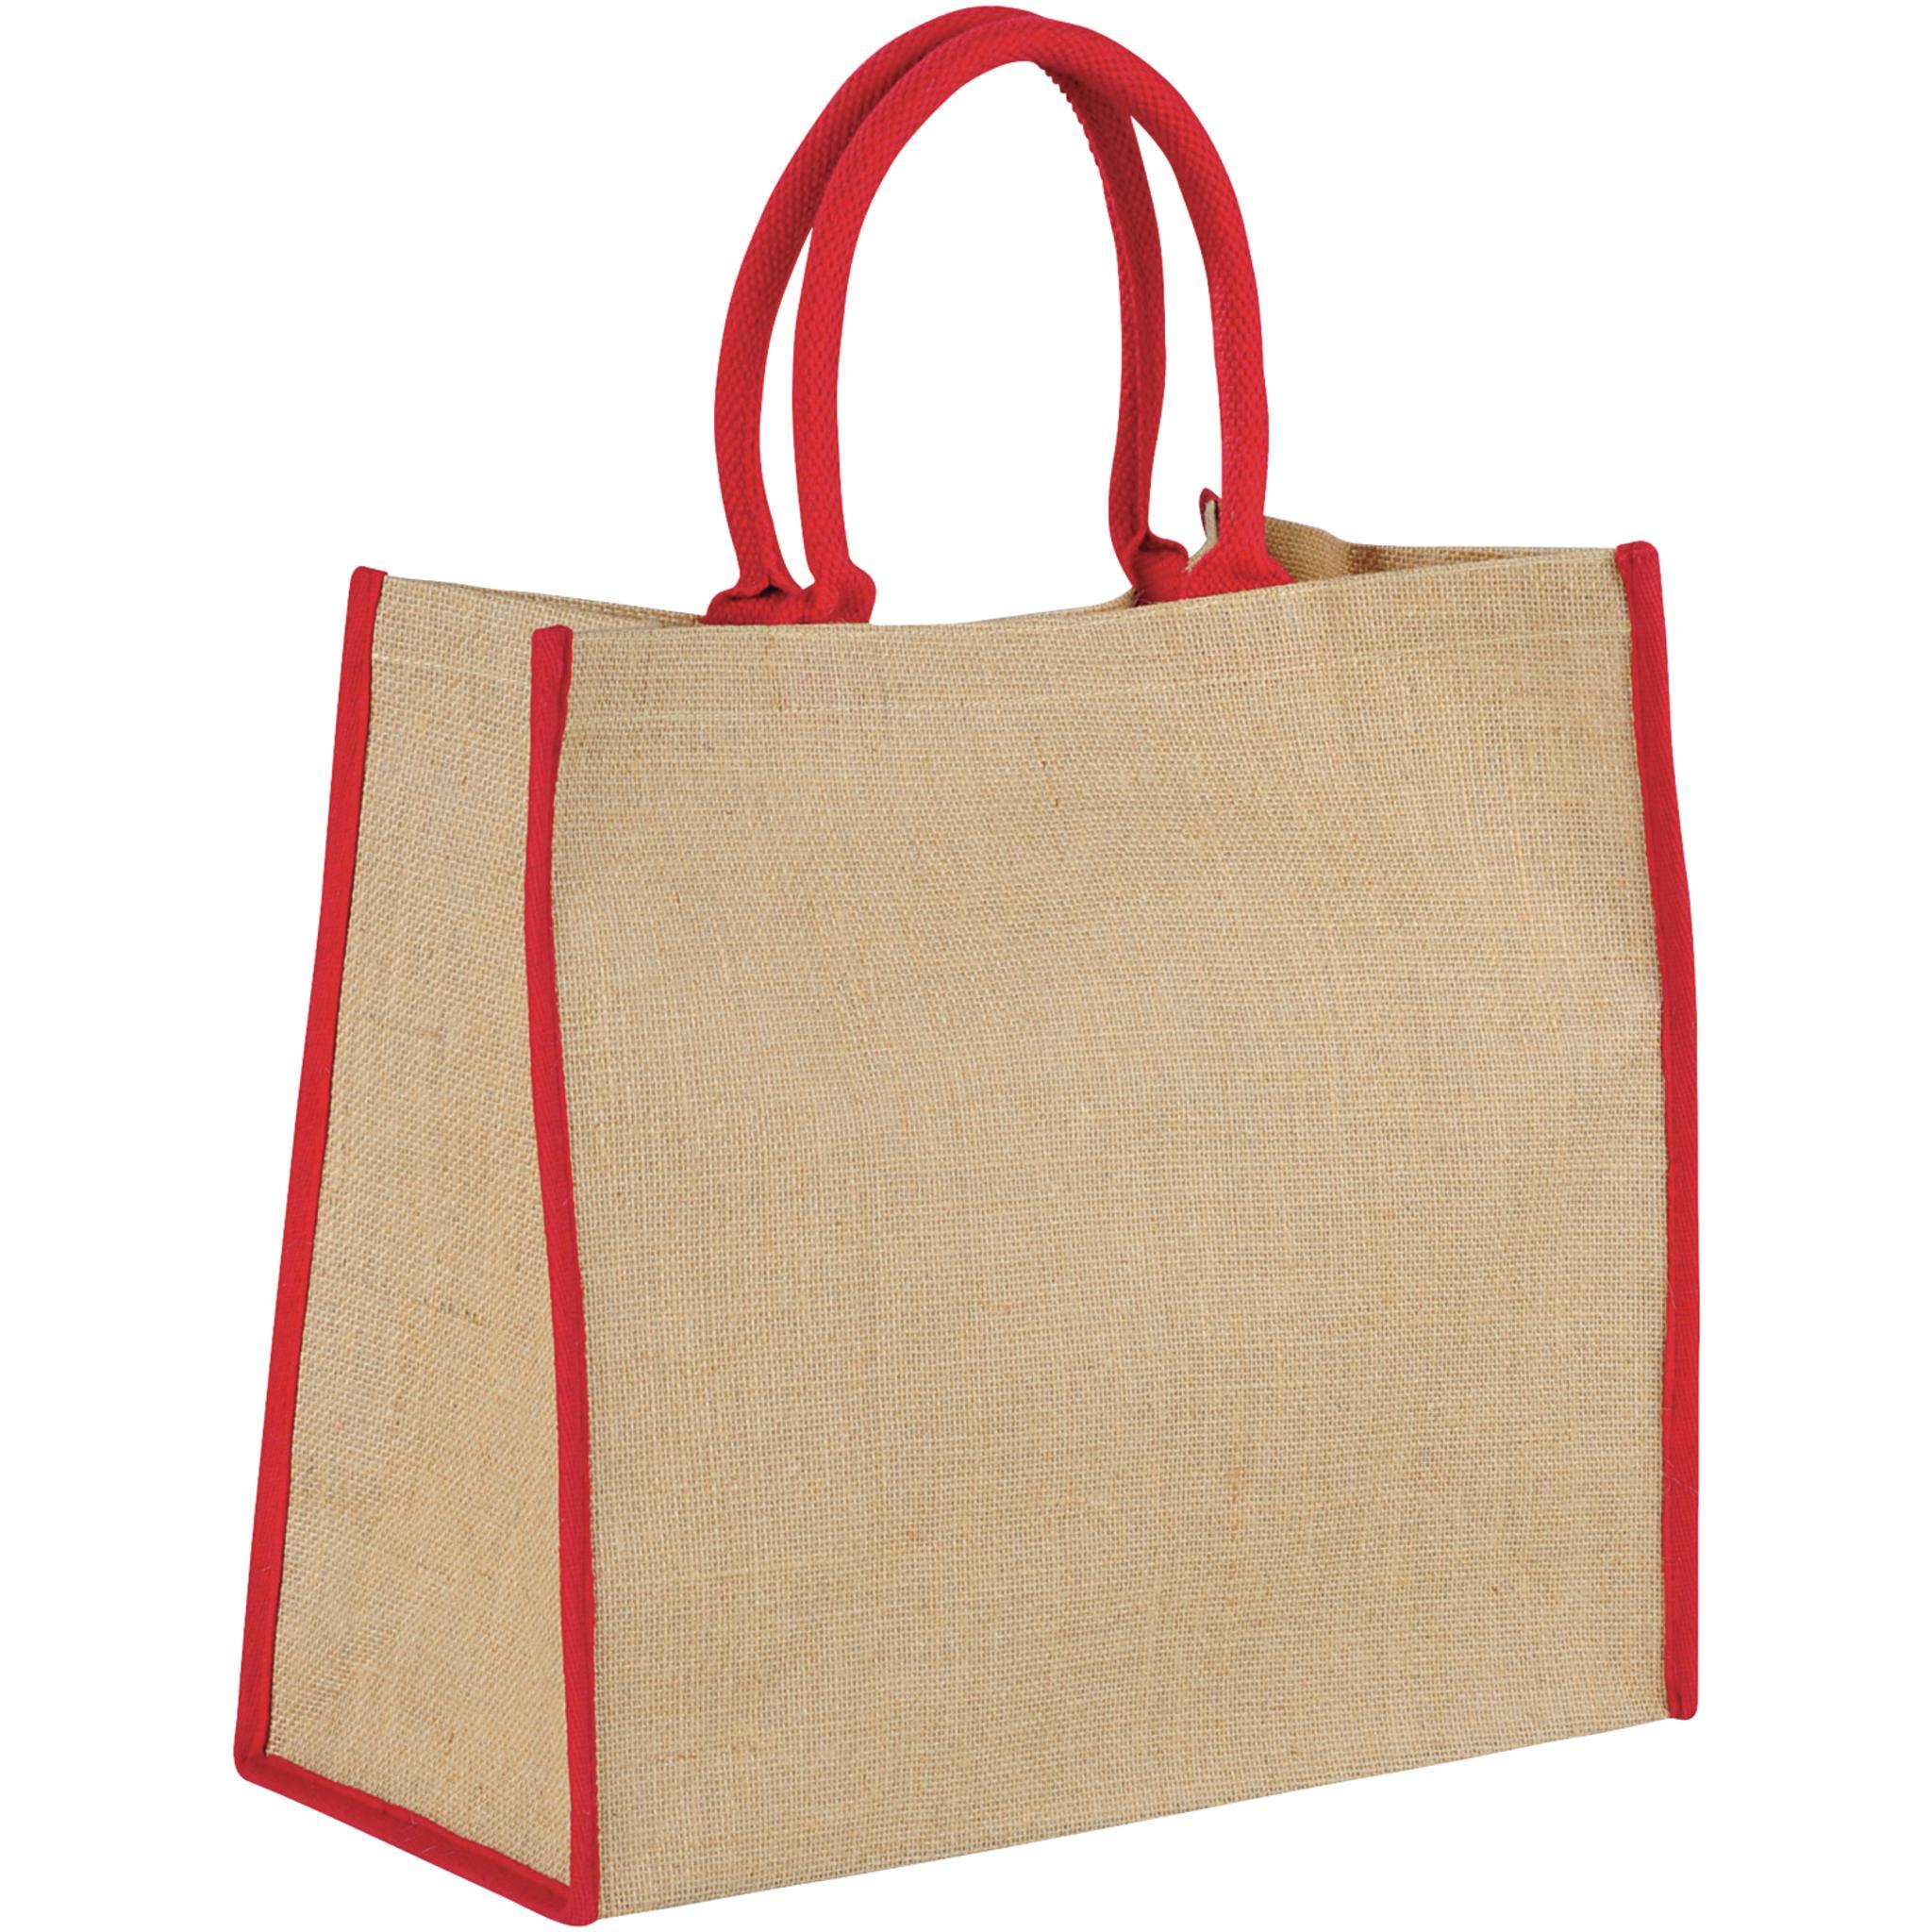 Bullet The Large Jute Tote (Natural/Red) (40.5 x 18.5 x 36cm)